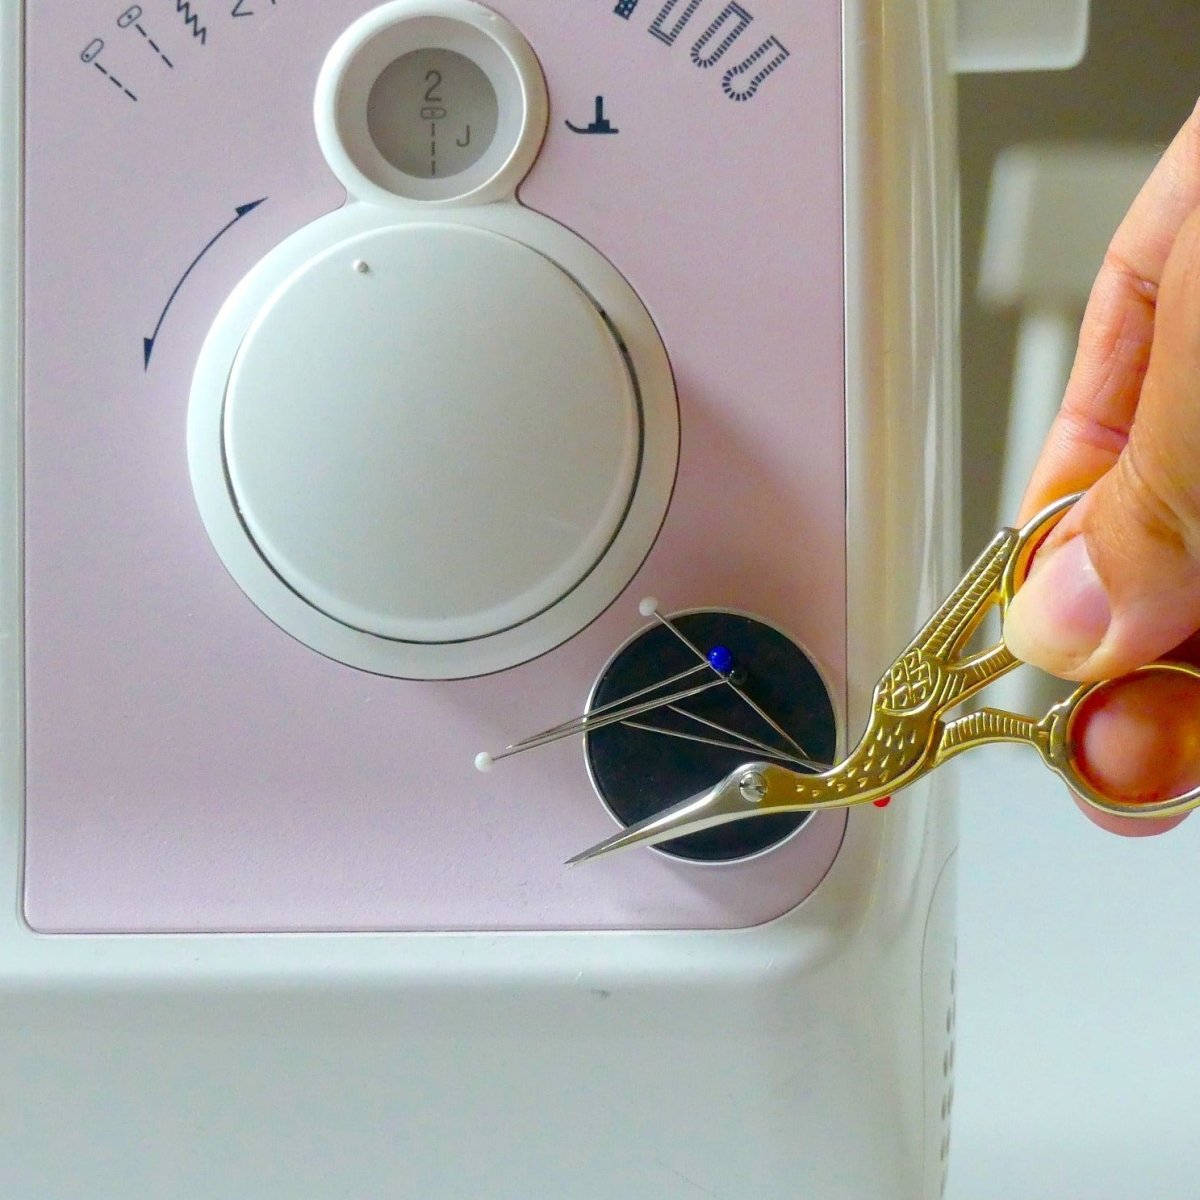 Magic Holder on a sewing machine holding pins and small stork scissors.